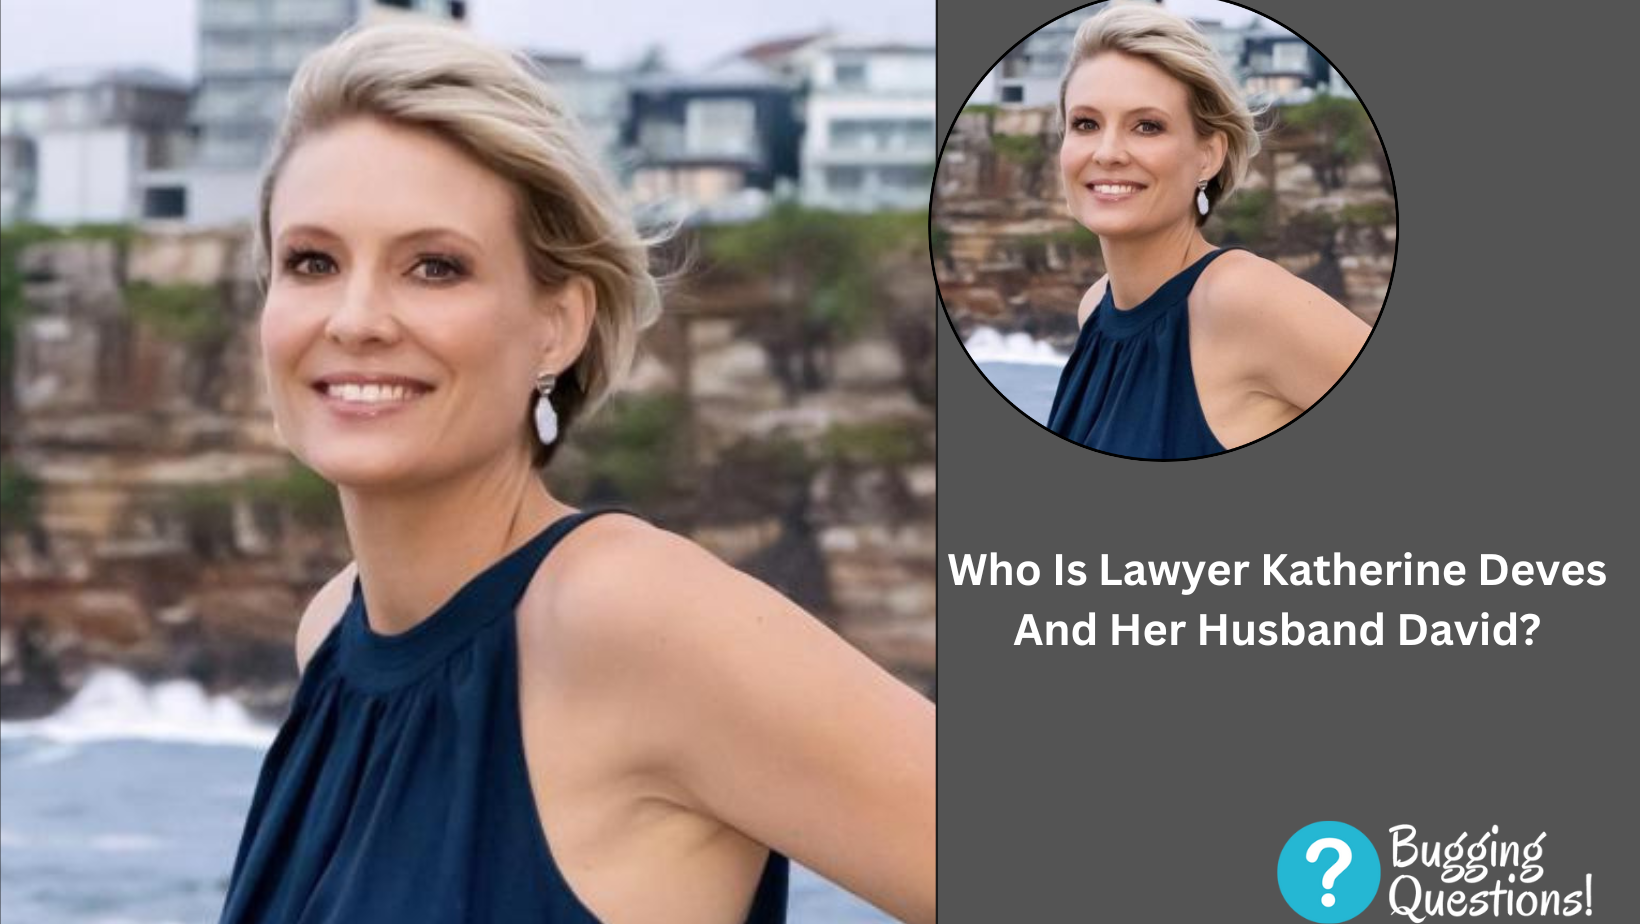 Who Is Lawyer Katherine Deves And Her Husband David?